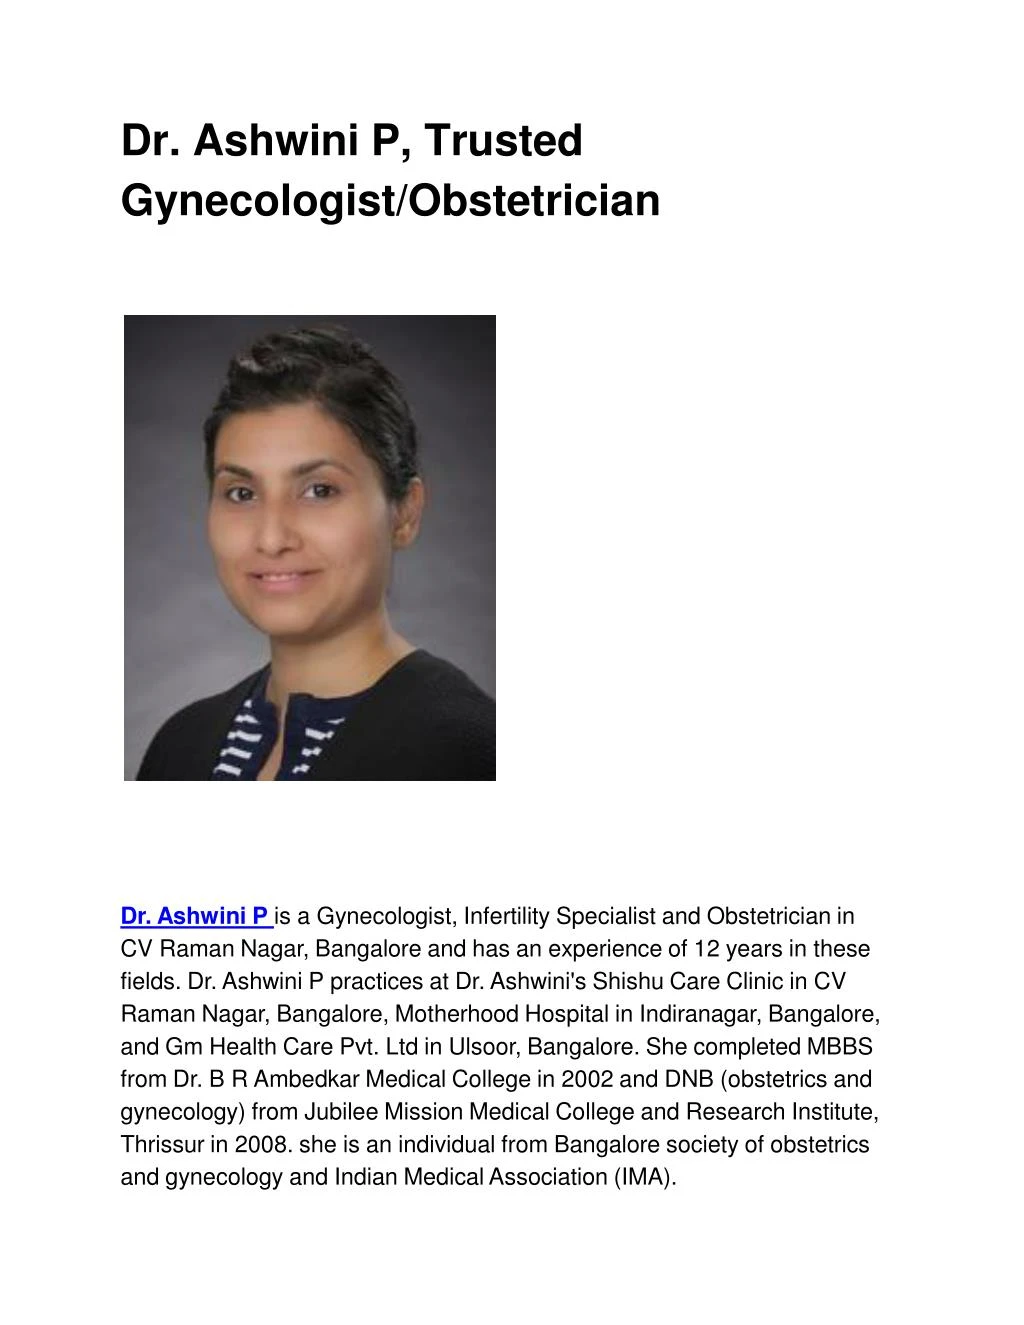 dr ashwini p trusted gynecologist obstetricia n